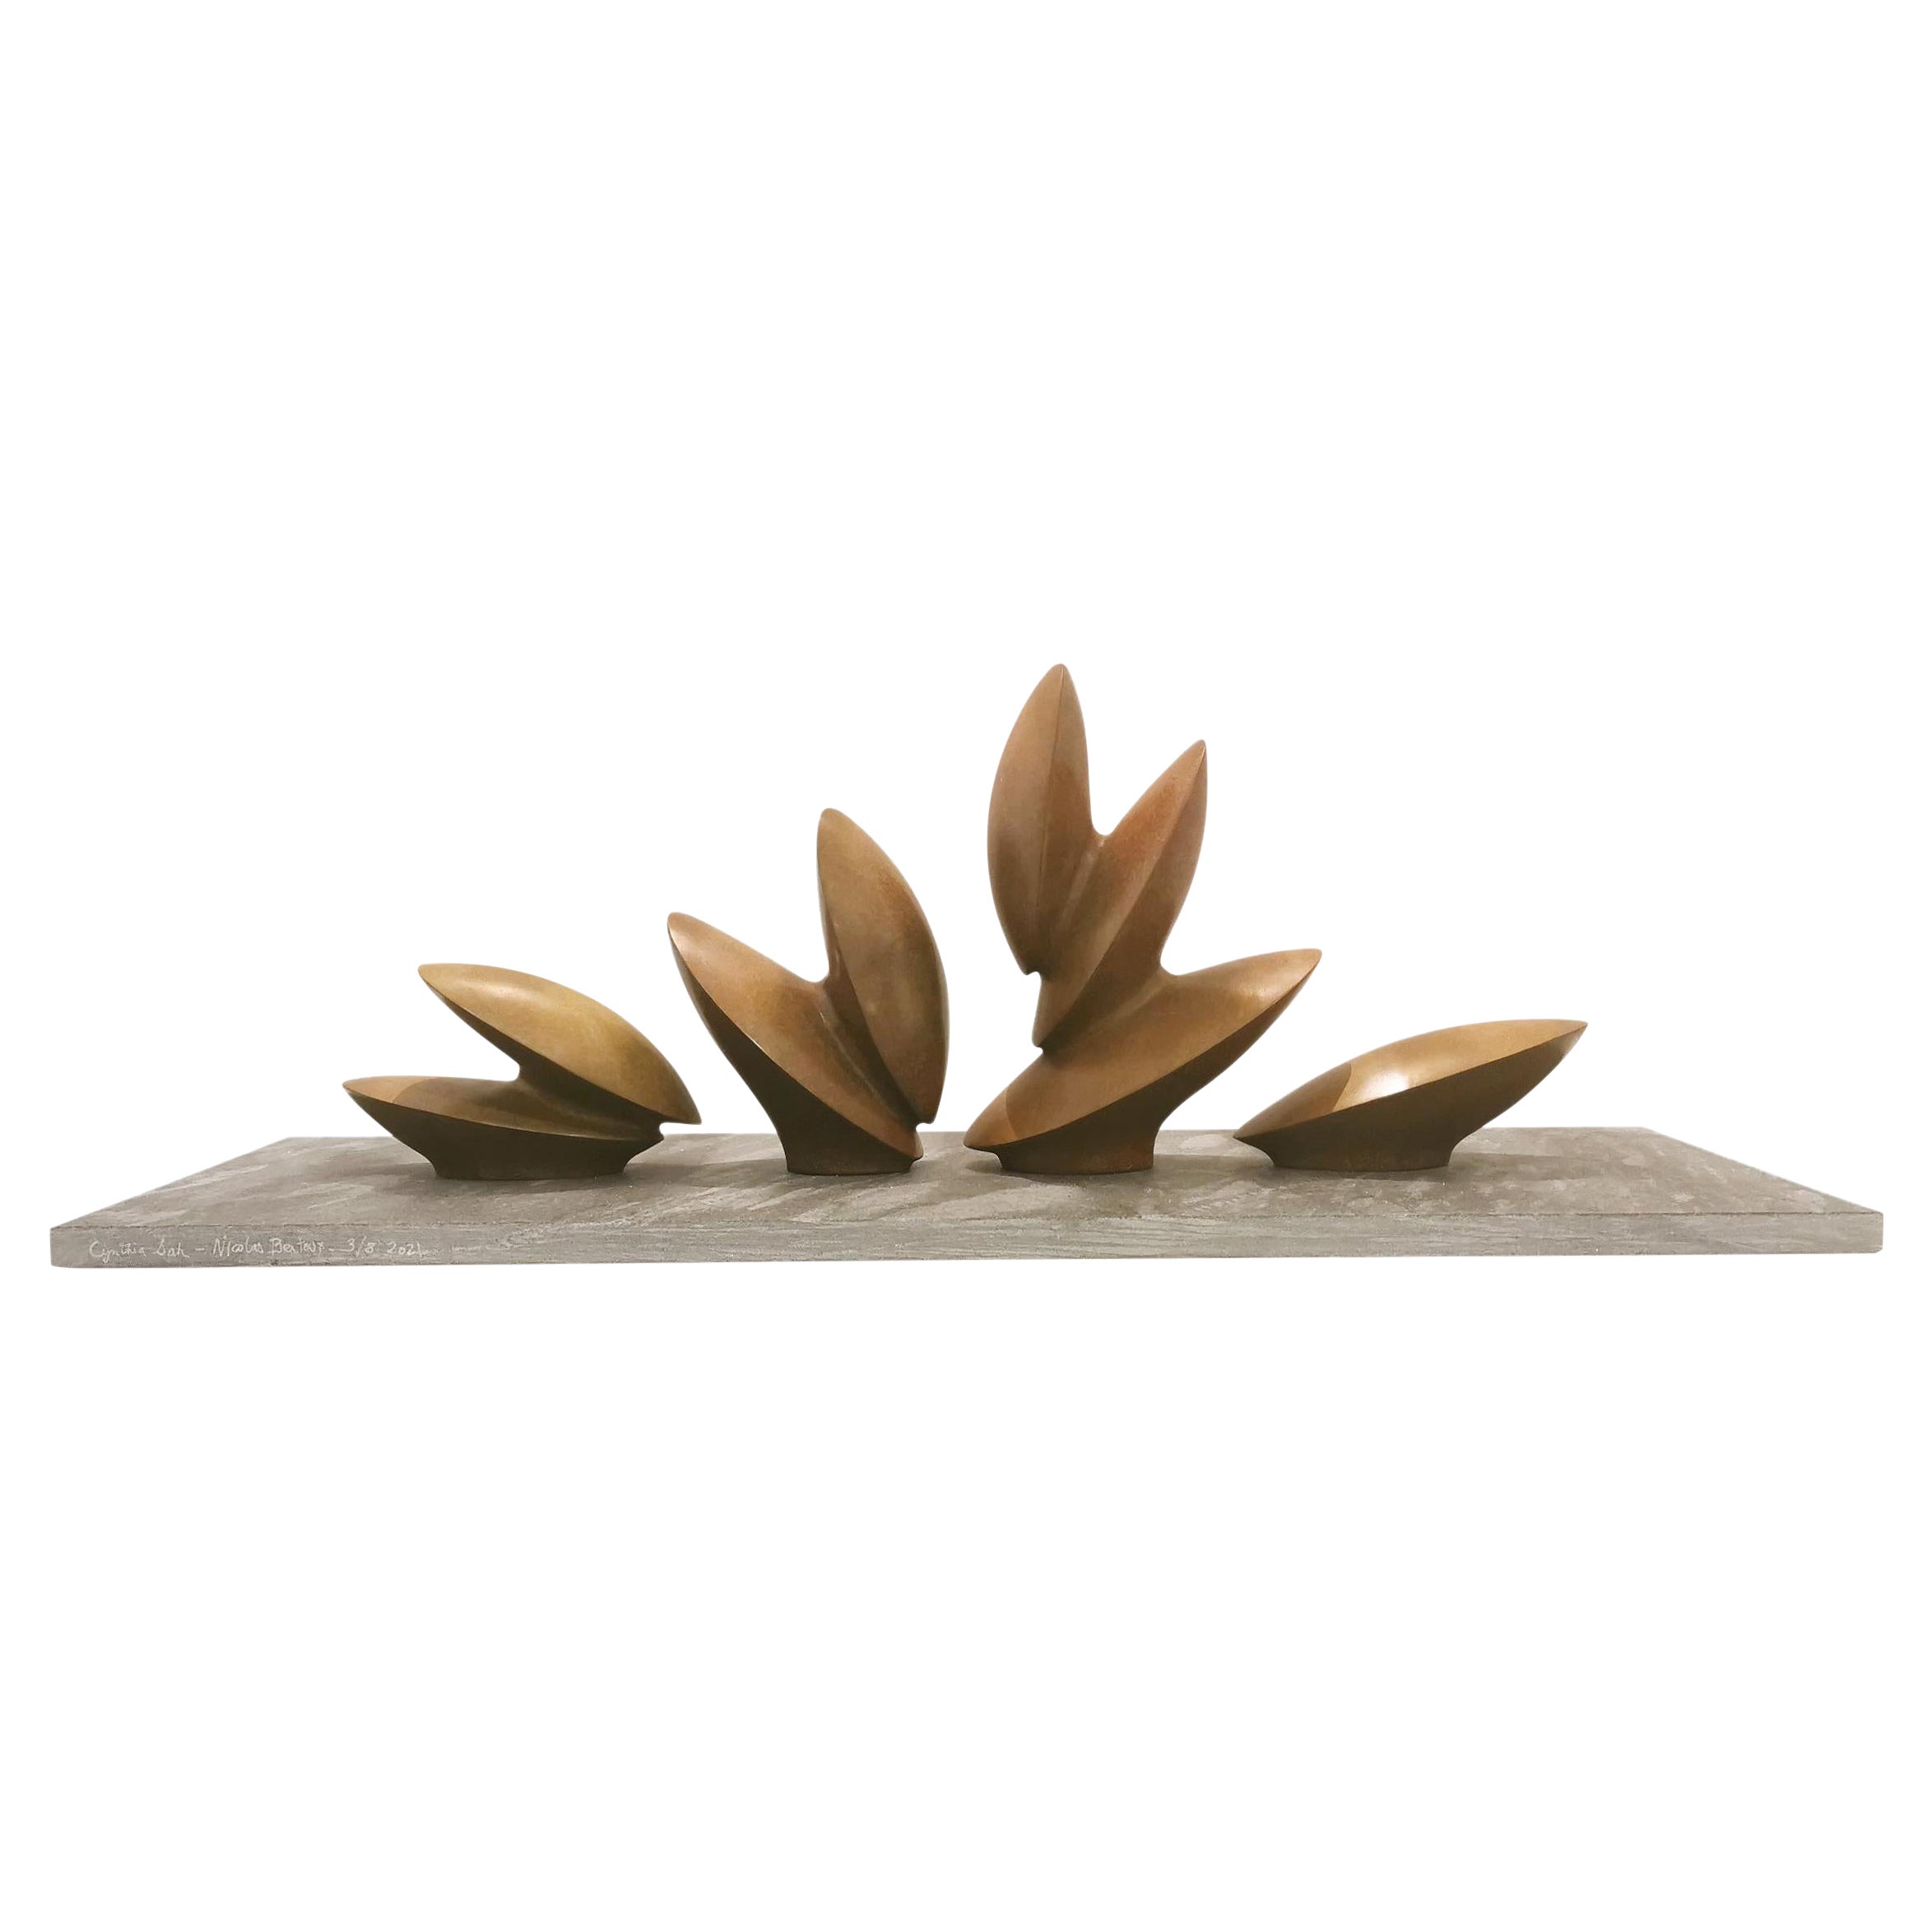 21st Century Abstract Sculpture Dancing Leaves by Nicolas Bertoux For Sale